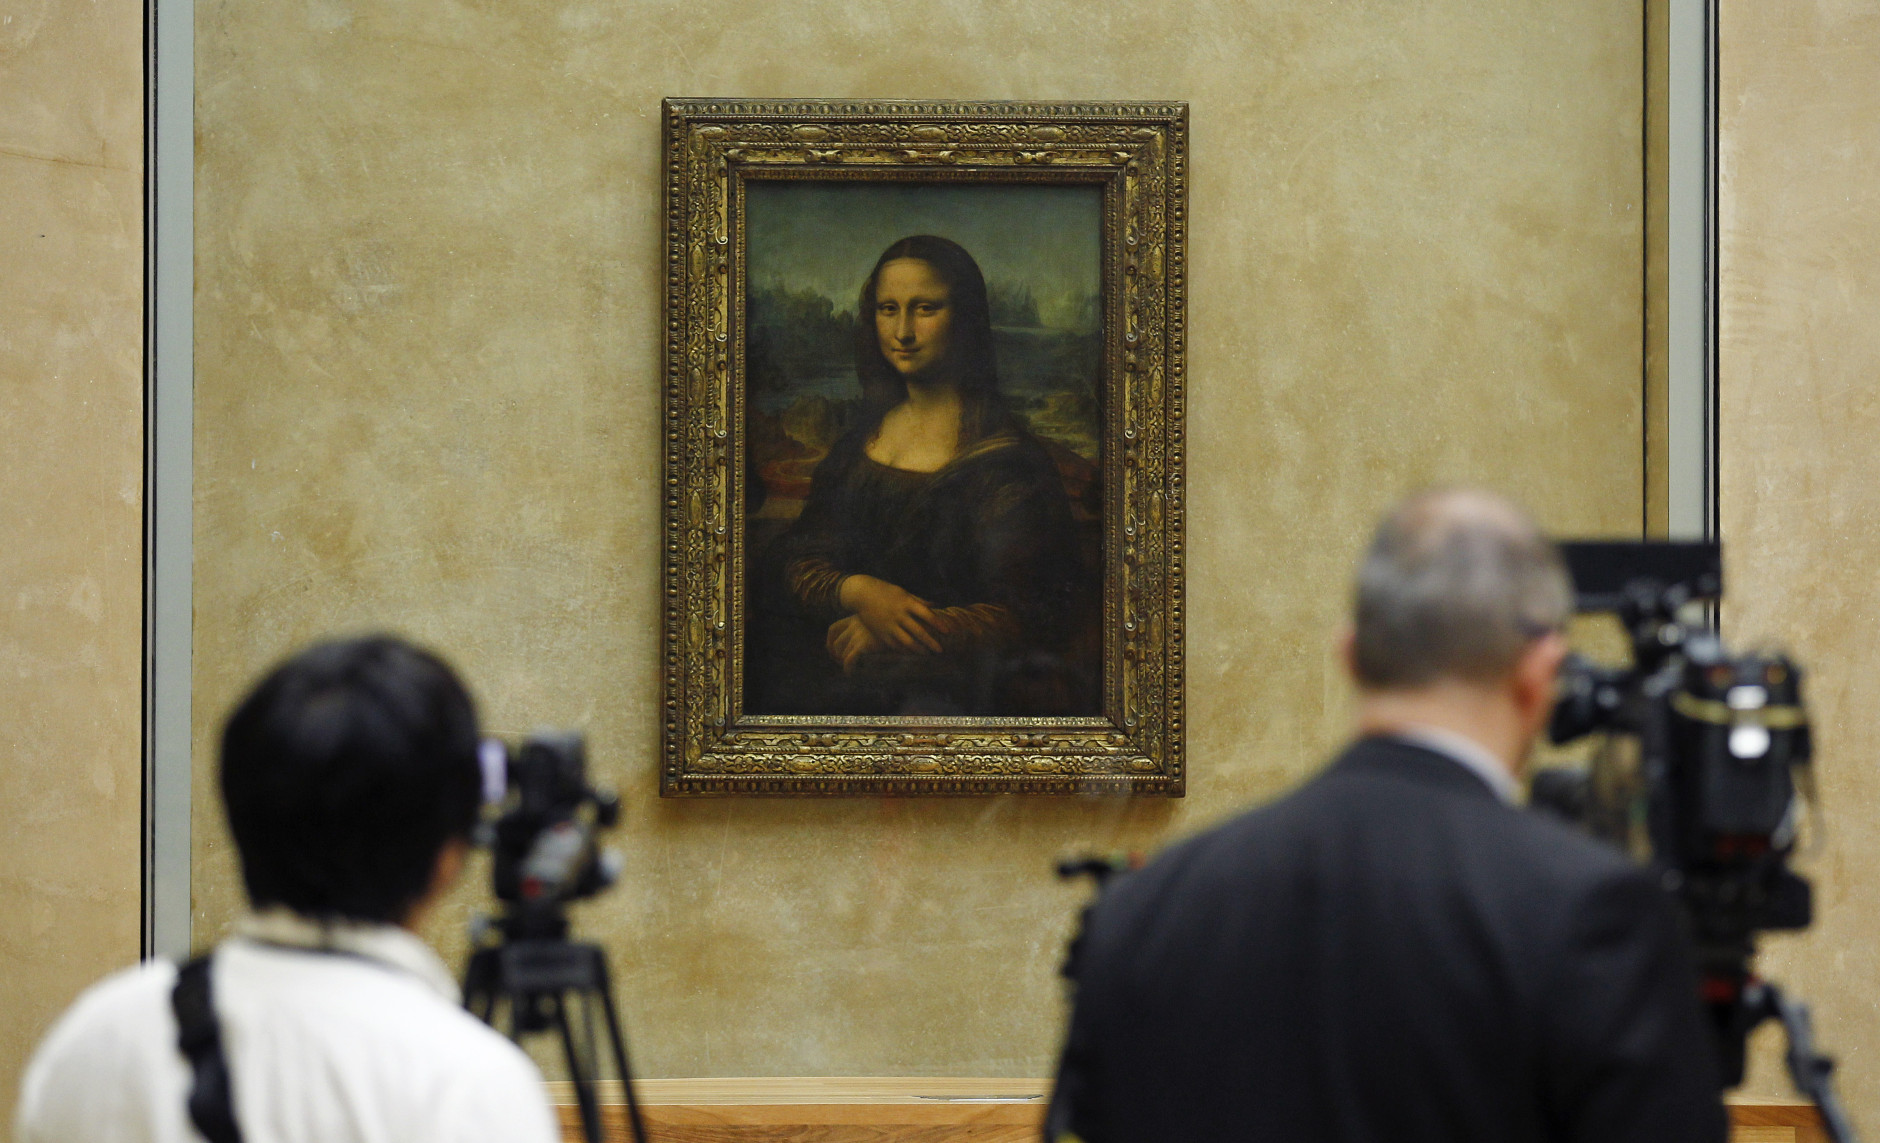 Members of the media are gathered next to the Mona Lisa, during an event to unveil the new lighting of Leonardo da Vinci's painting Mona Lisa, also known as La Joconde, at the Louvre museum in Paris, Tuesday June 4, 2013. Mona Lisa is now illuminated by LED lighting. The lighting had to meet various technical specifications, but also meet the more subjective and aesthetic requirements of the museum Director and Frances Historical Monuments Committee.(AP Photo/Remy de la Mauviniere)